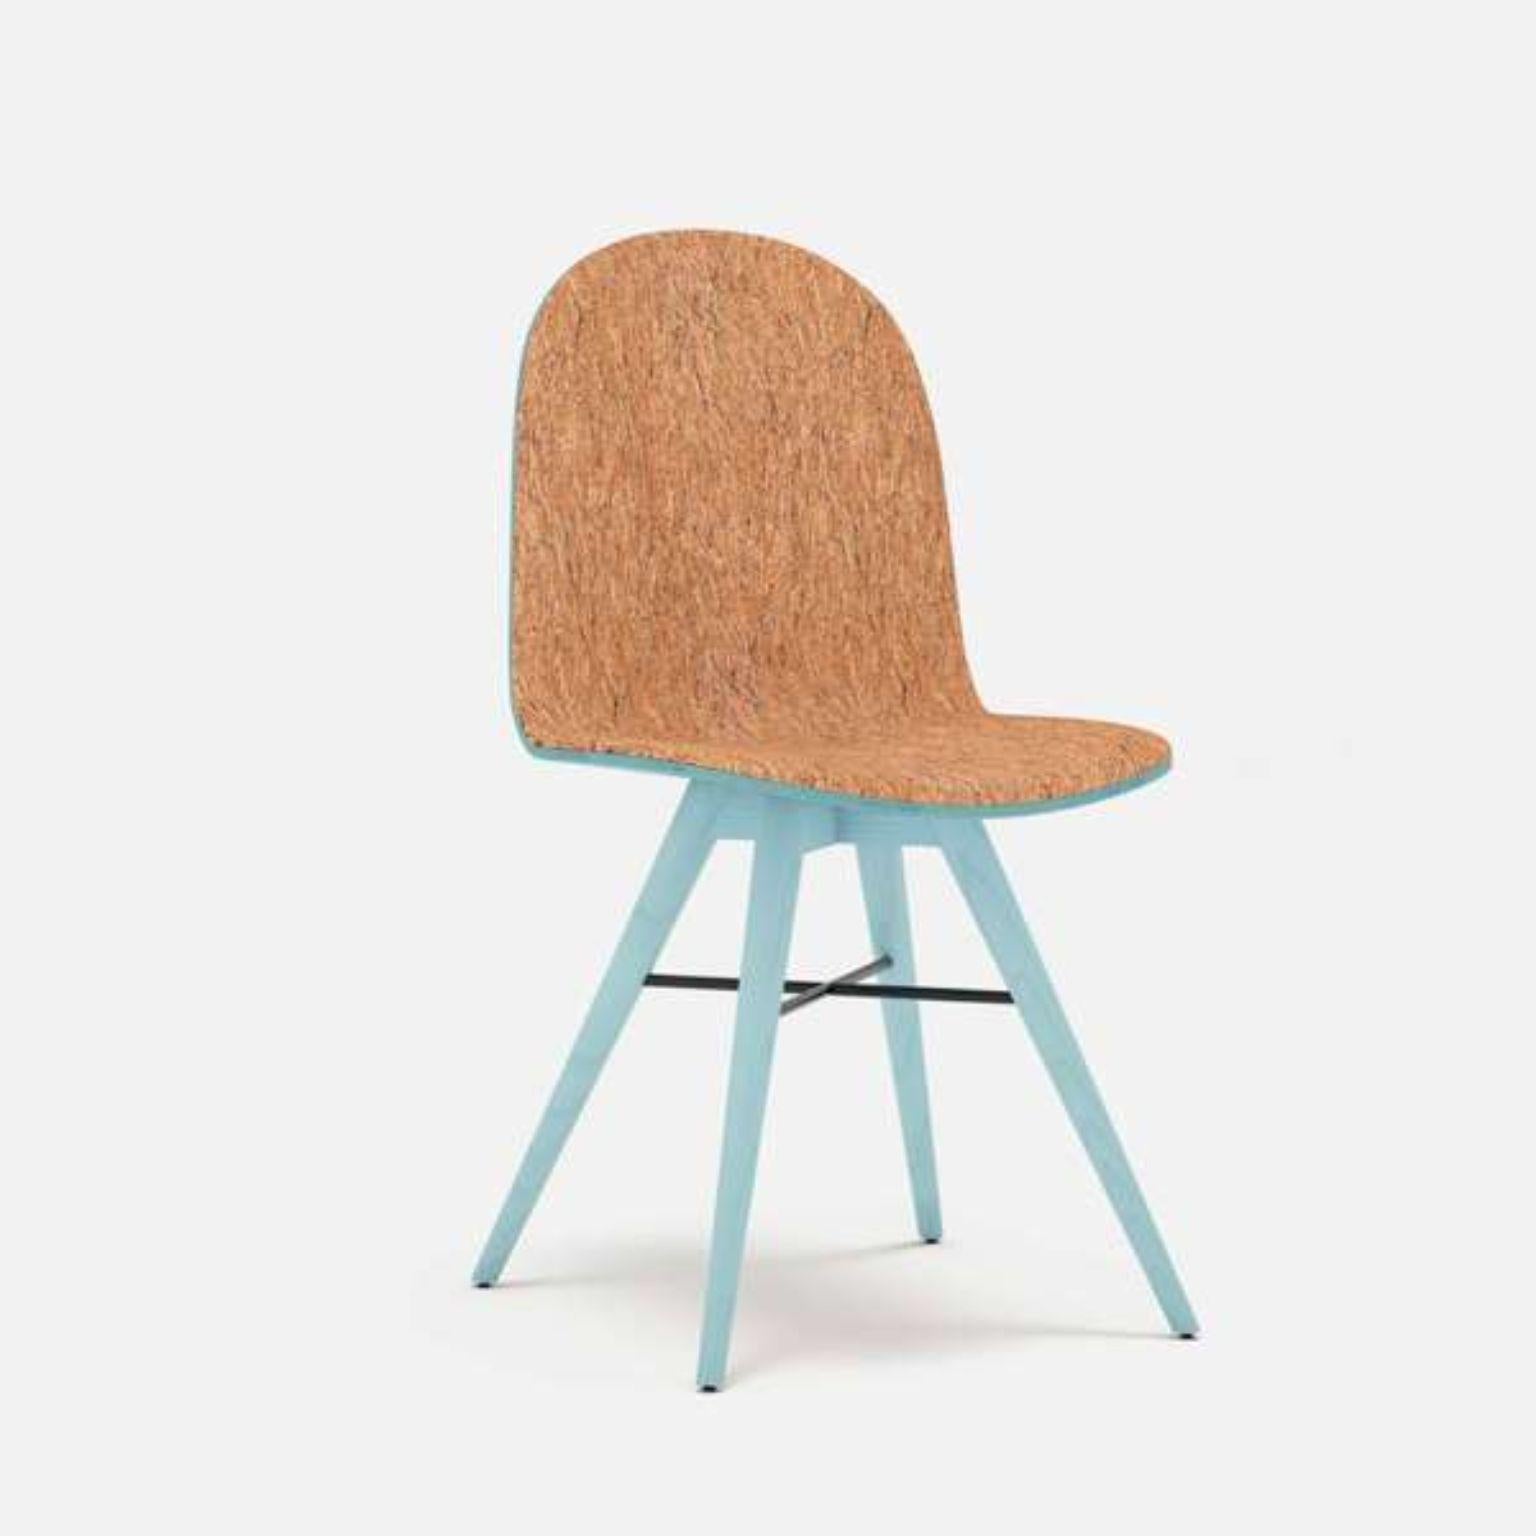 Painted ash and corkfabric contemporary chair by Alexandre Caldas
Dimensions: W 40 x D 40 x H 80 cm
Materials: Painted ash solid wood, corkabric

Structure available in beech, ash, oak, mix wood
Seat available in fabric, leather,